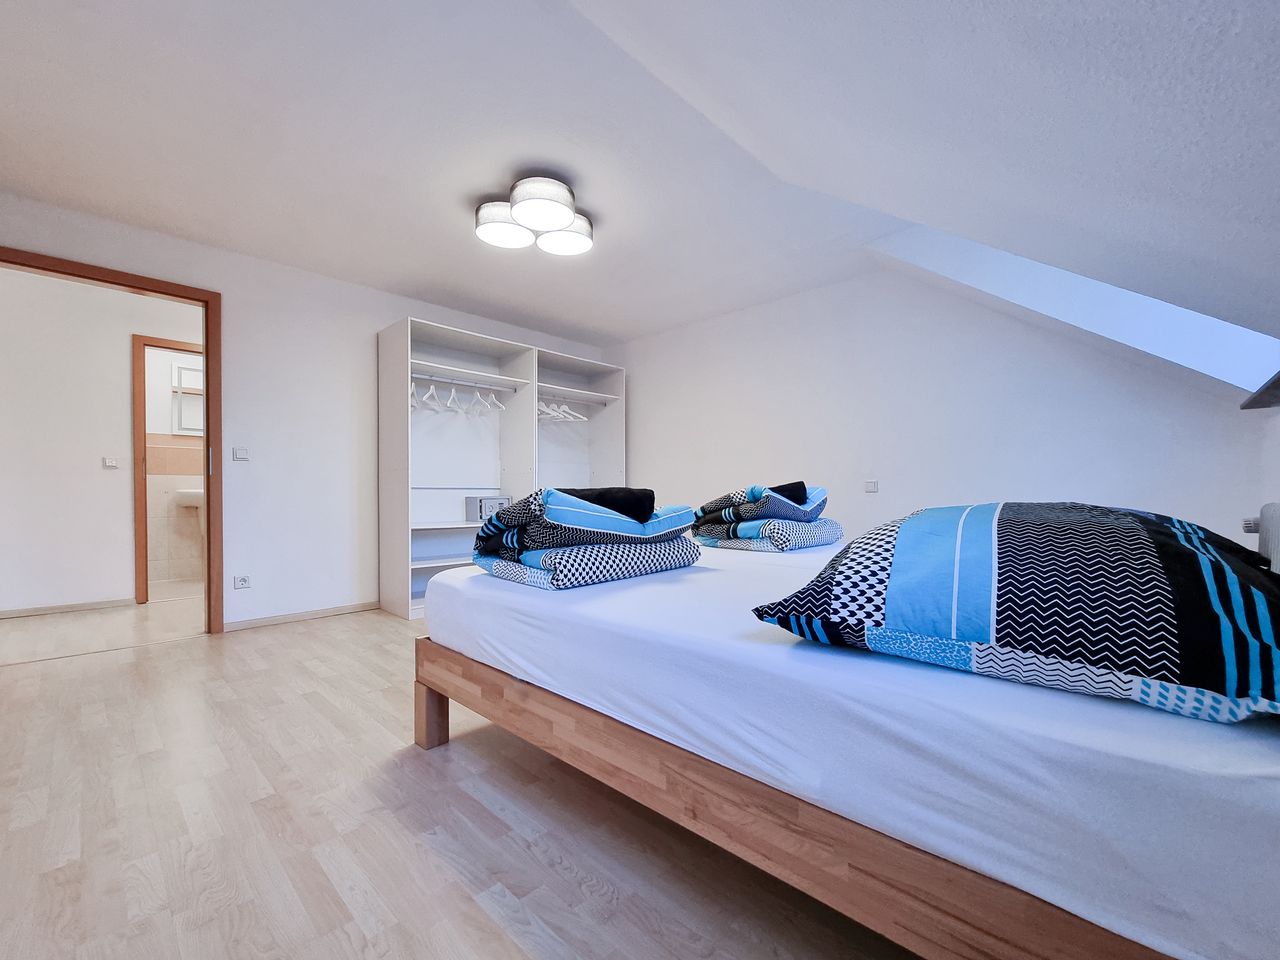 128m² attic apartment with 8 beds + balcony in Krefeld